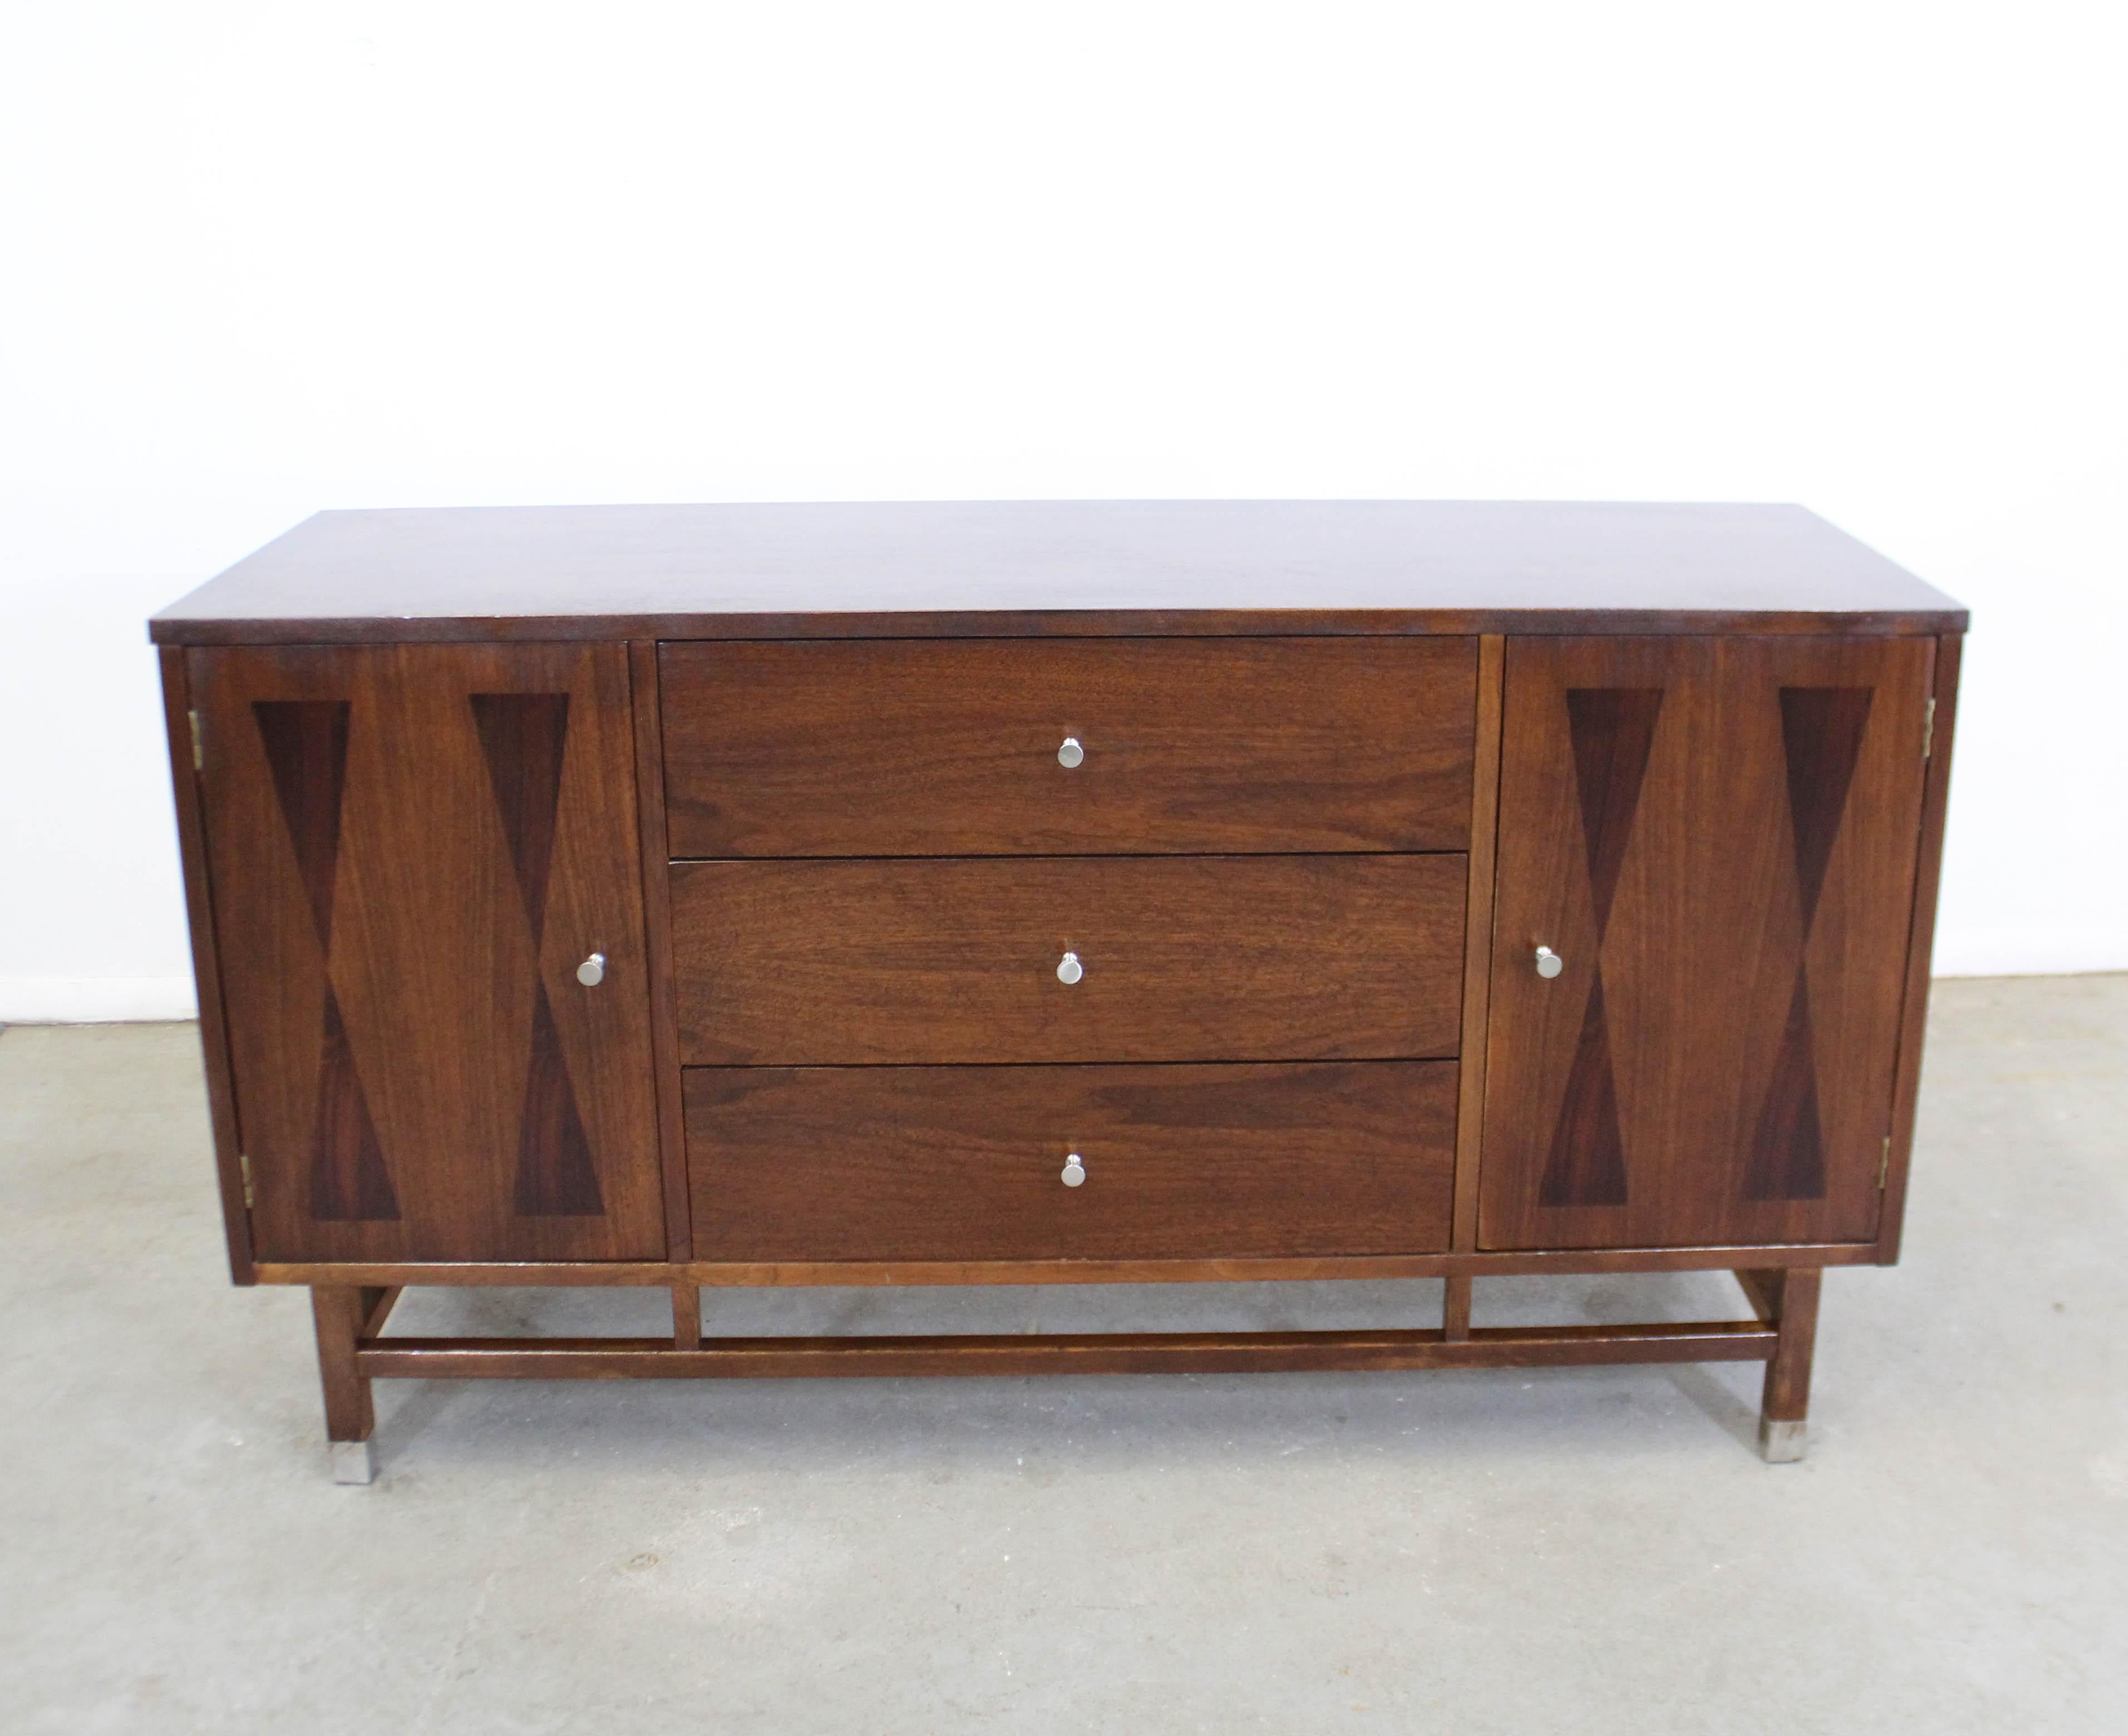 Midcentury Danish modern H. Paul Browning Stanley Petite walnut credenza

Offered is a vintage American Mid-Century Modern walnut credenza/sideboard by H. Paul Browning for Stanley Furniture. The simple design features darker wood inlays on the